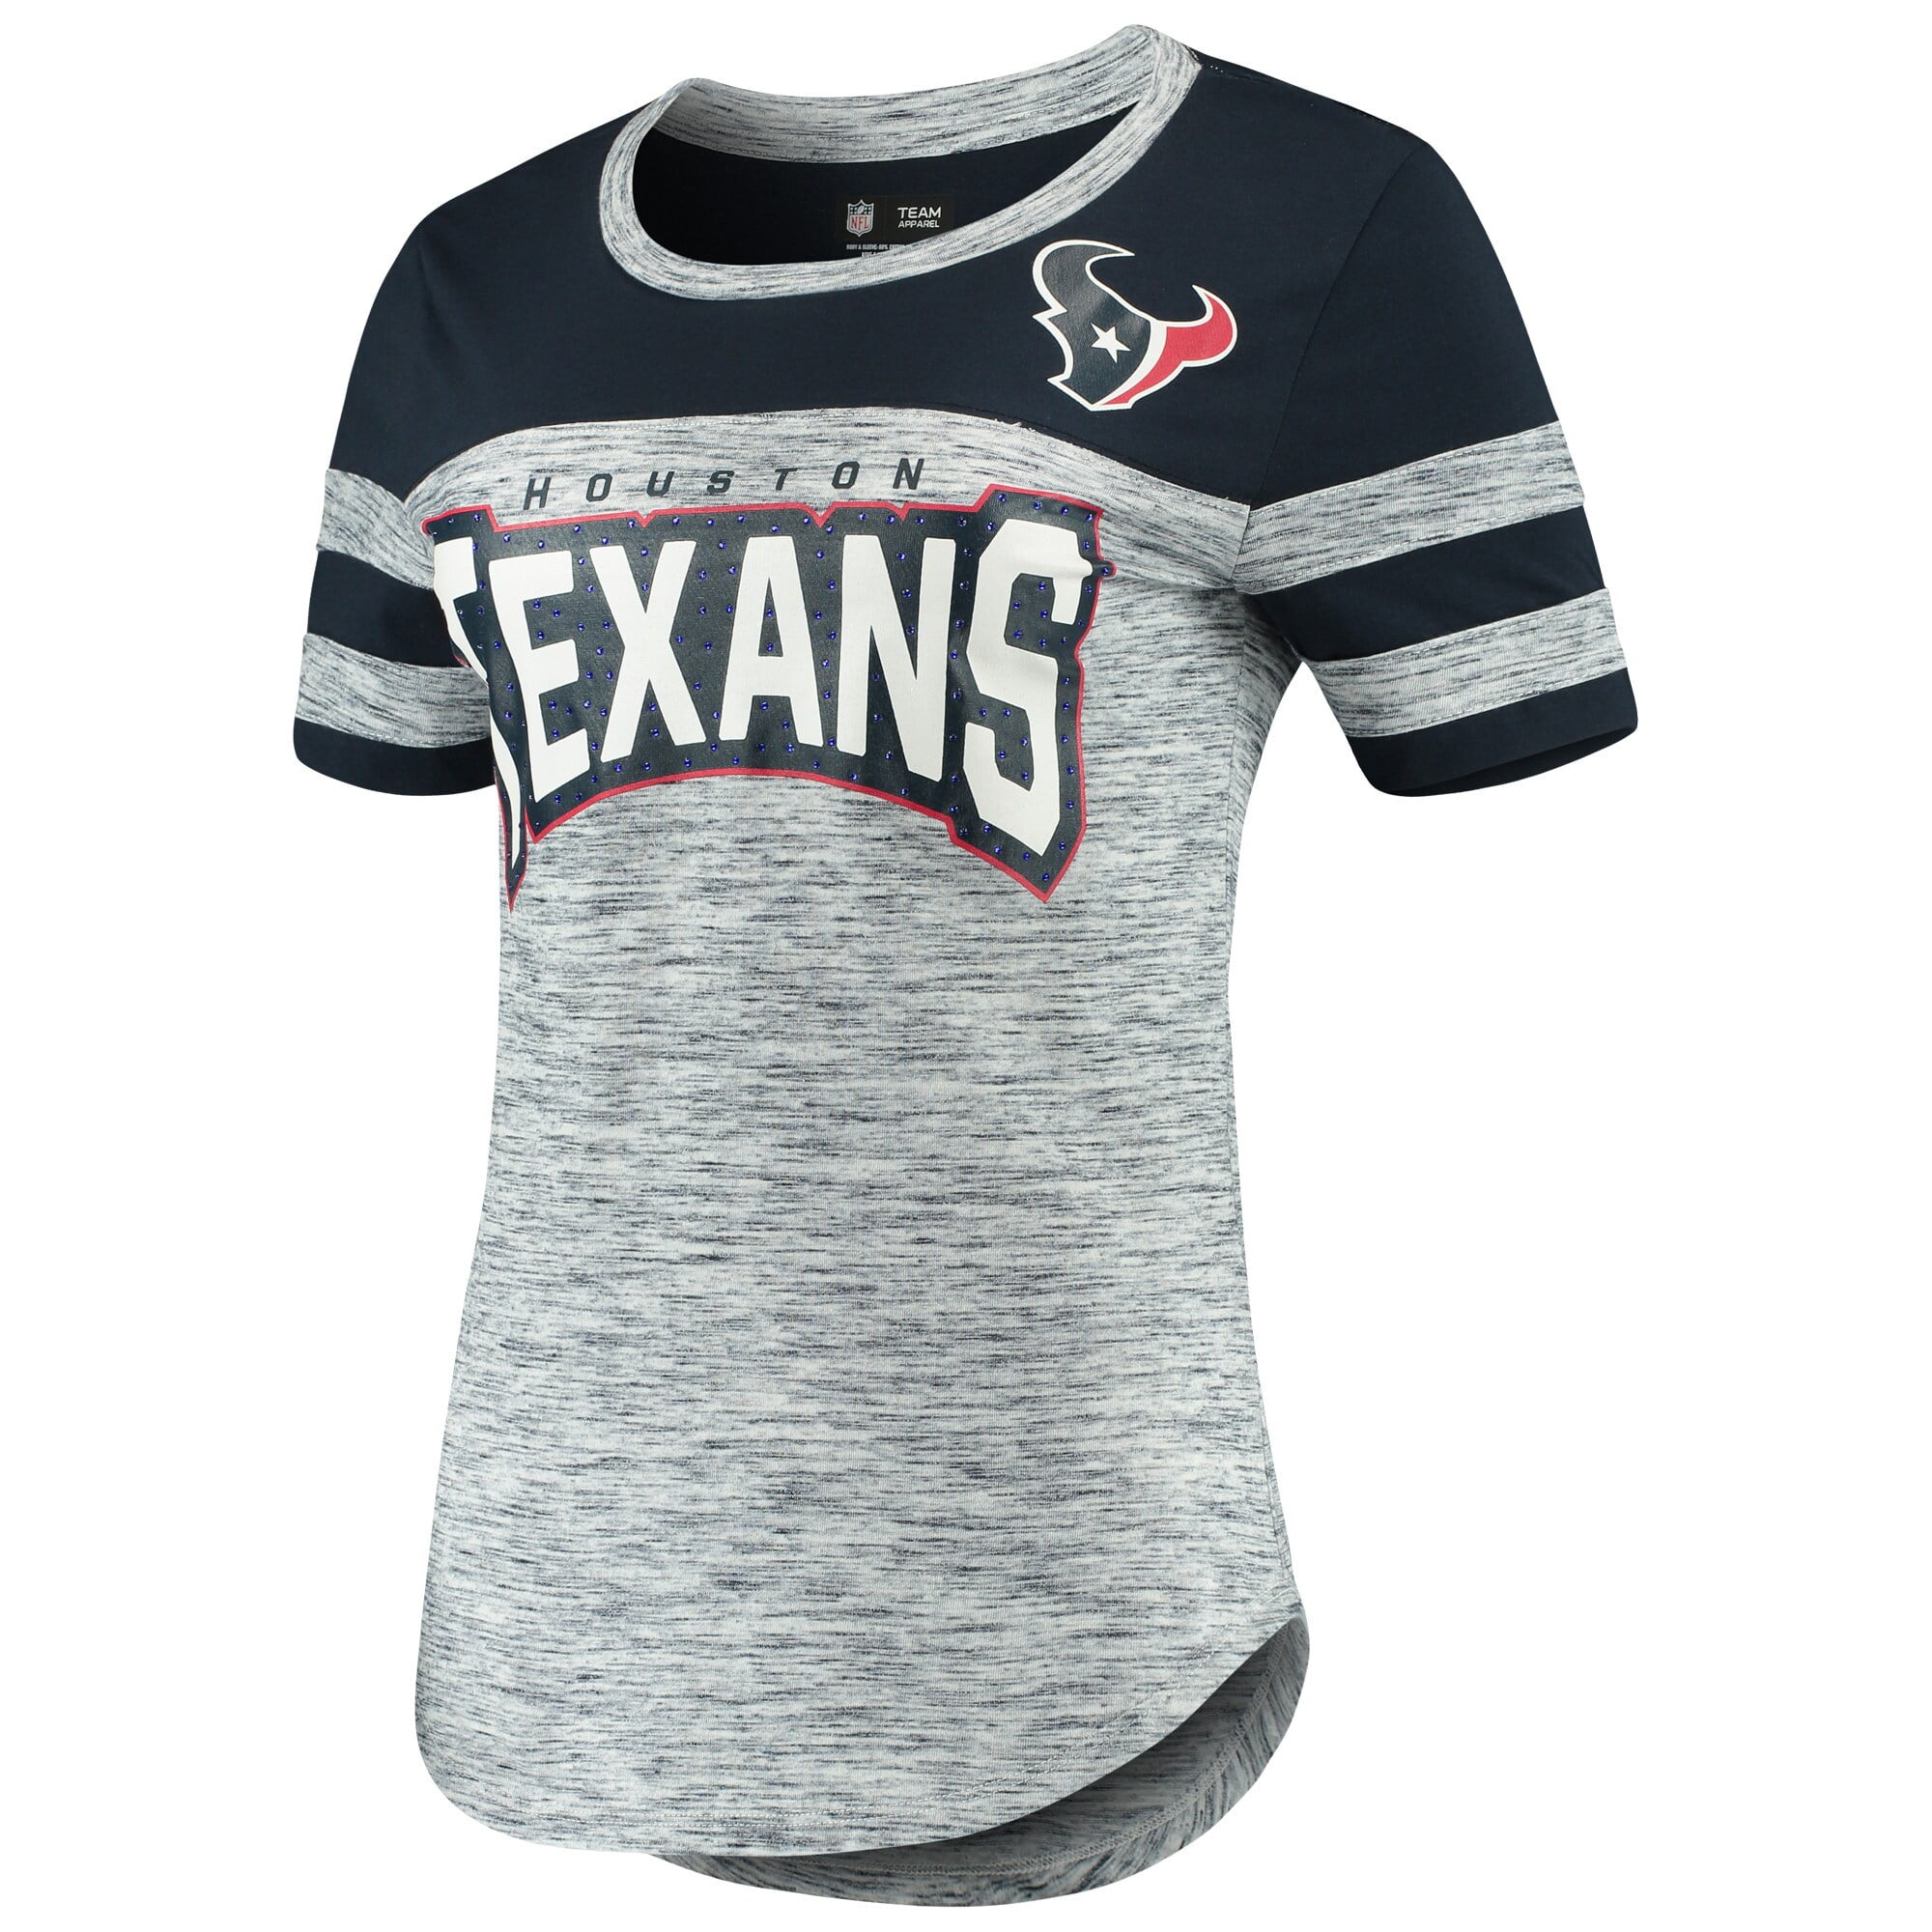 womens texans jersey with rhinestones